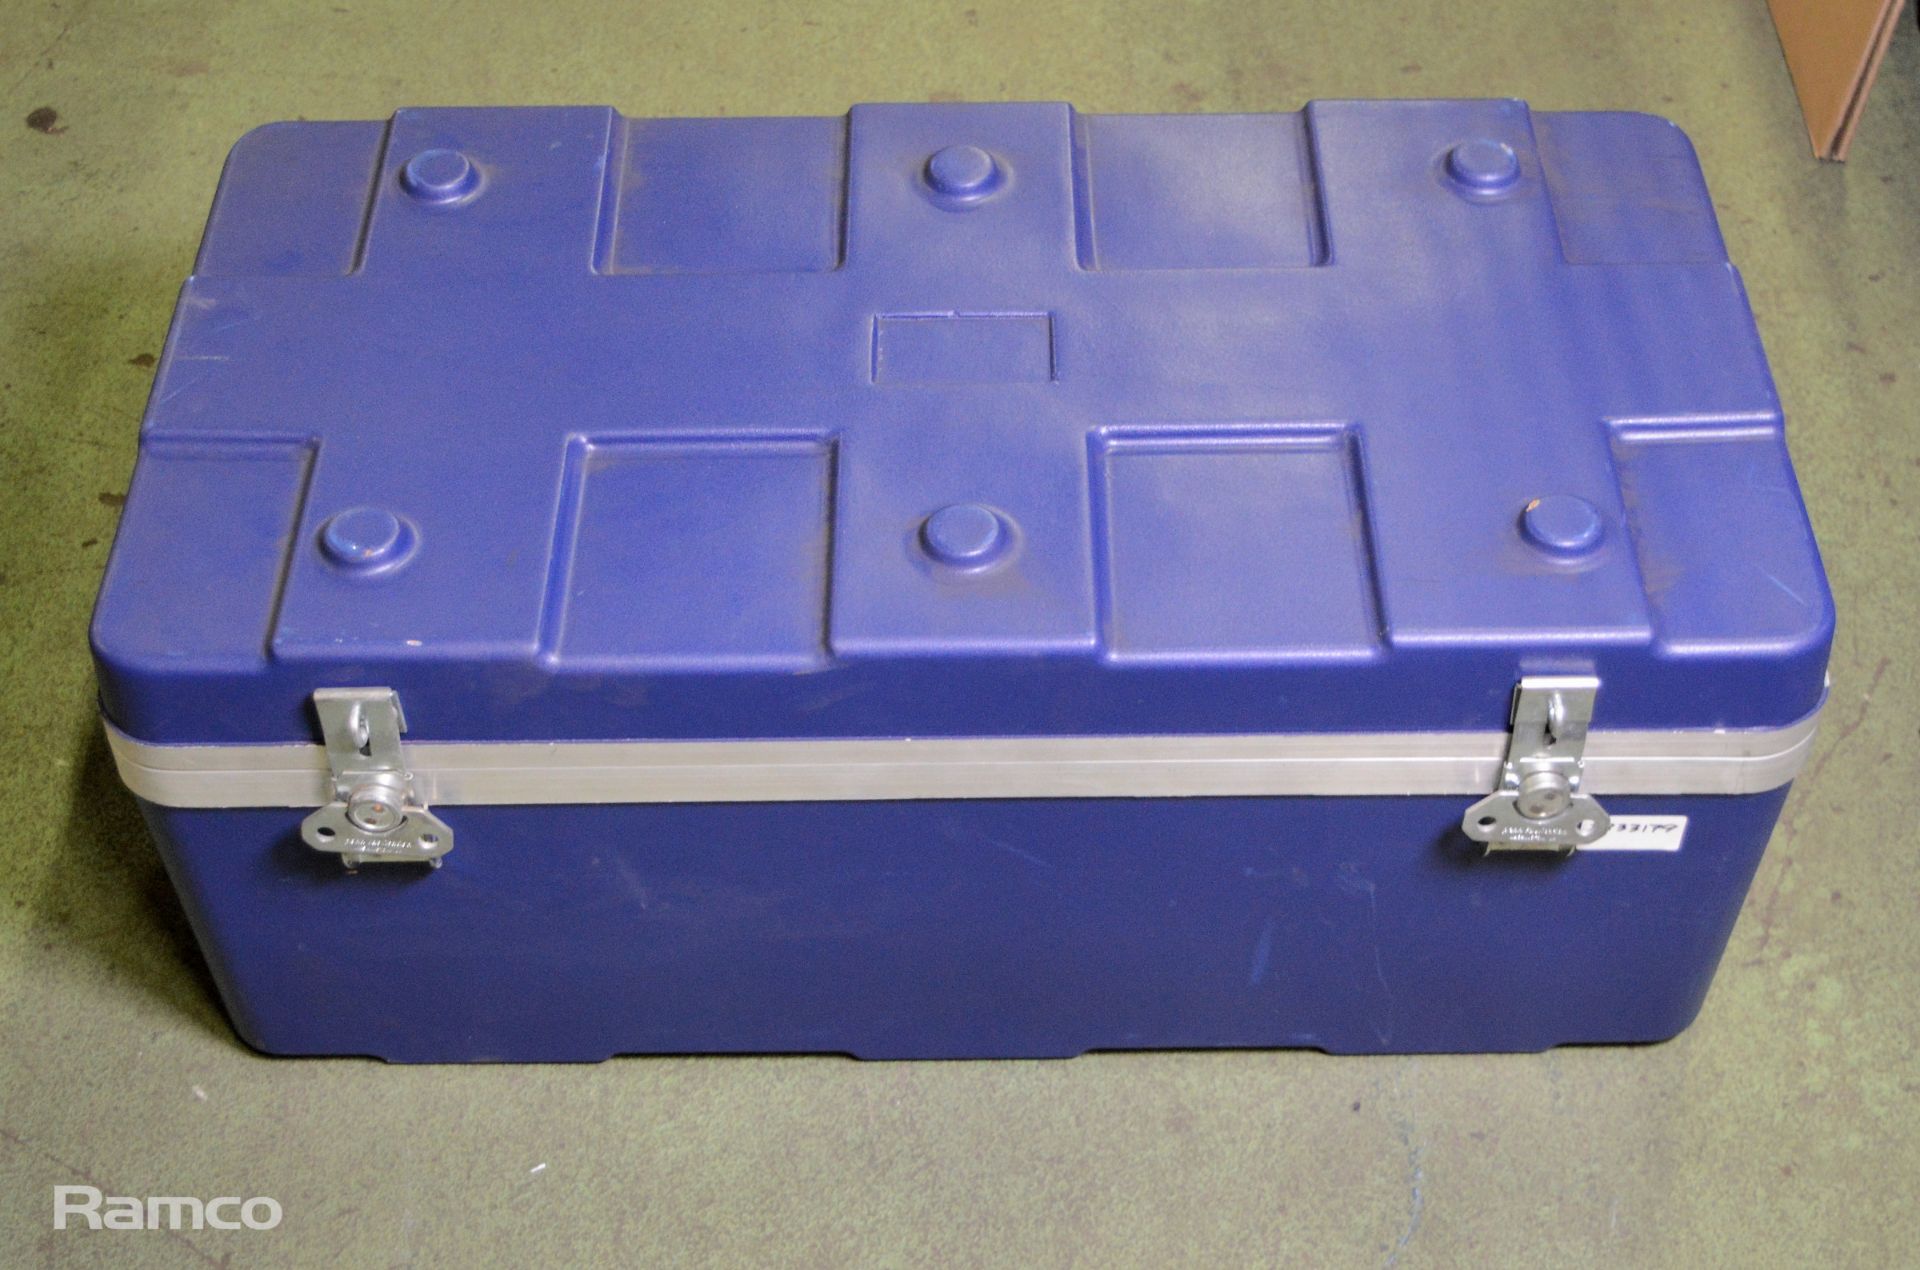 Plastic empty toolbox with trays L 82 x W 45 x H 33cm - Image 4 of 4